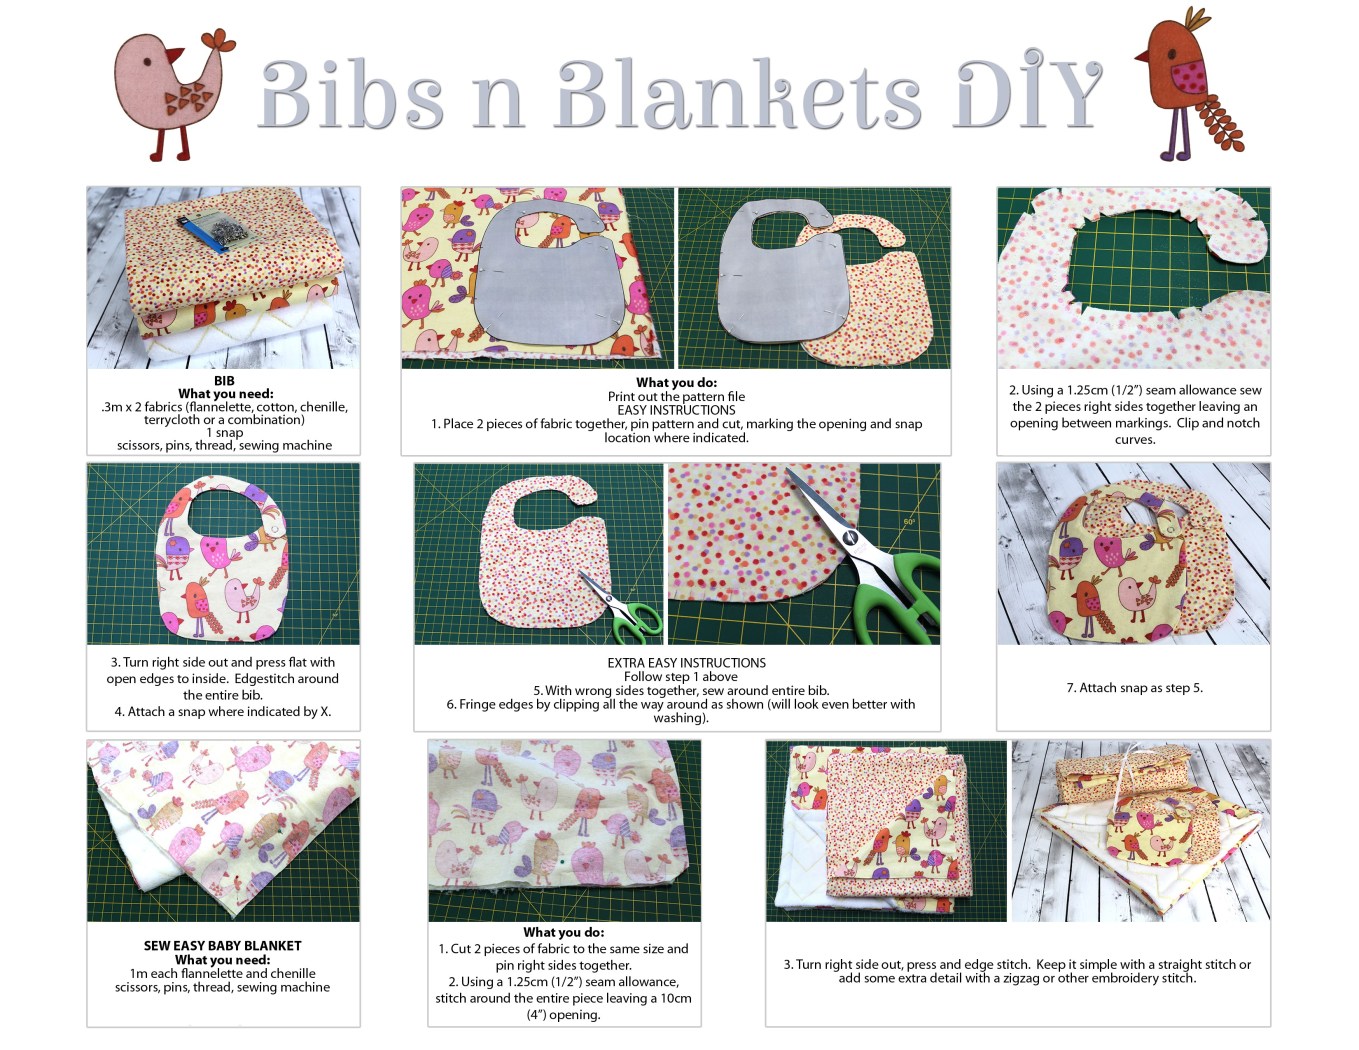 Steps to create your own baby bibs and blankets.